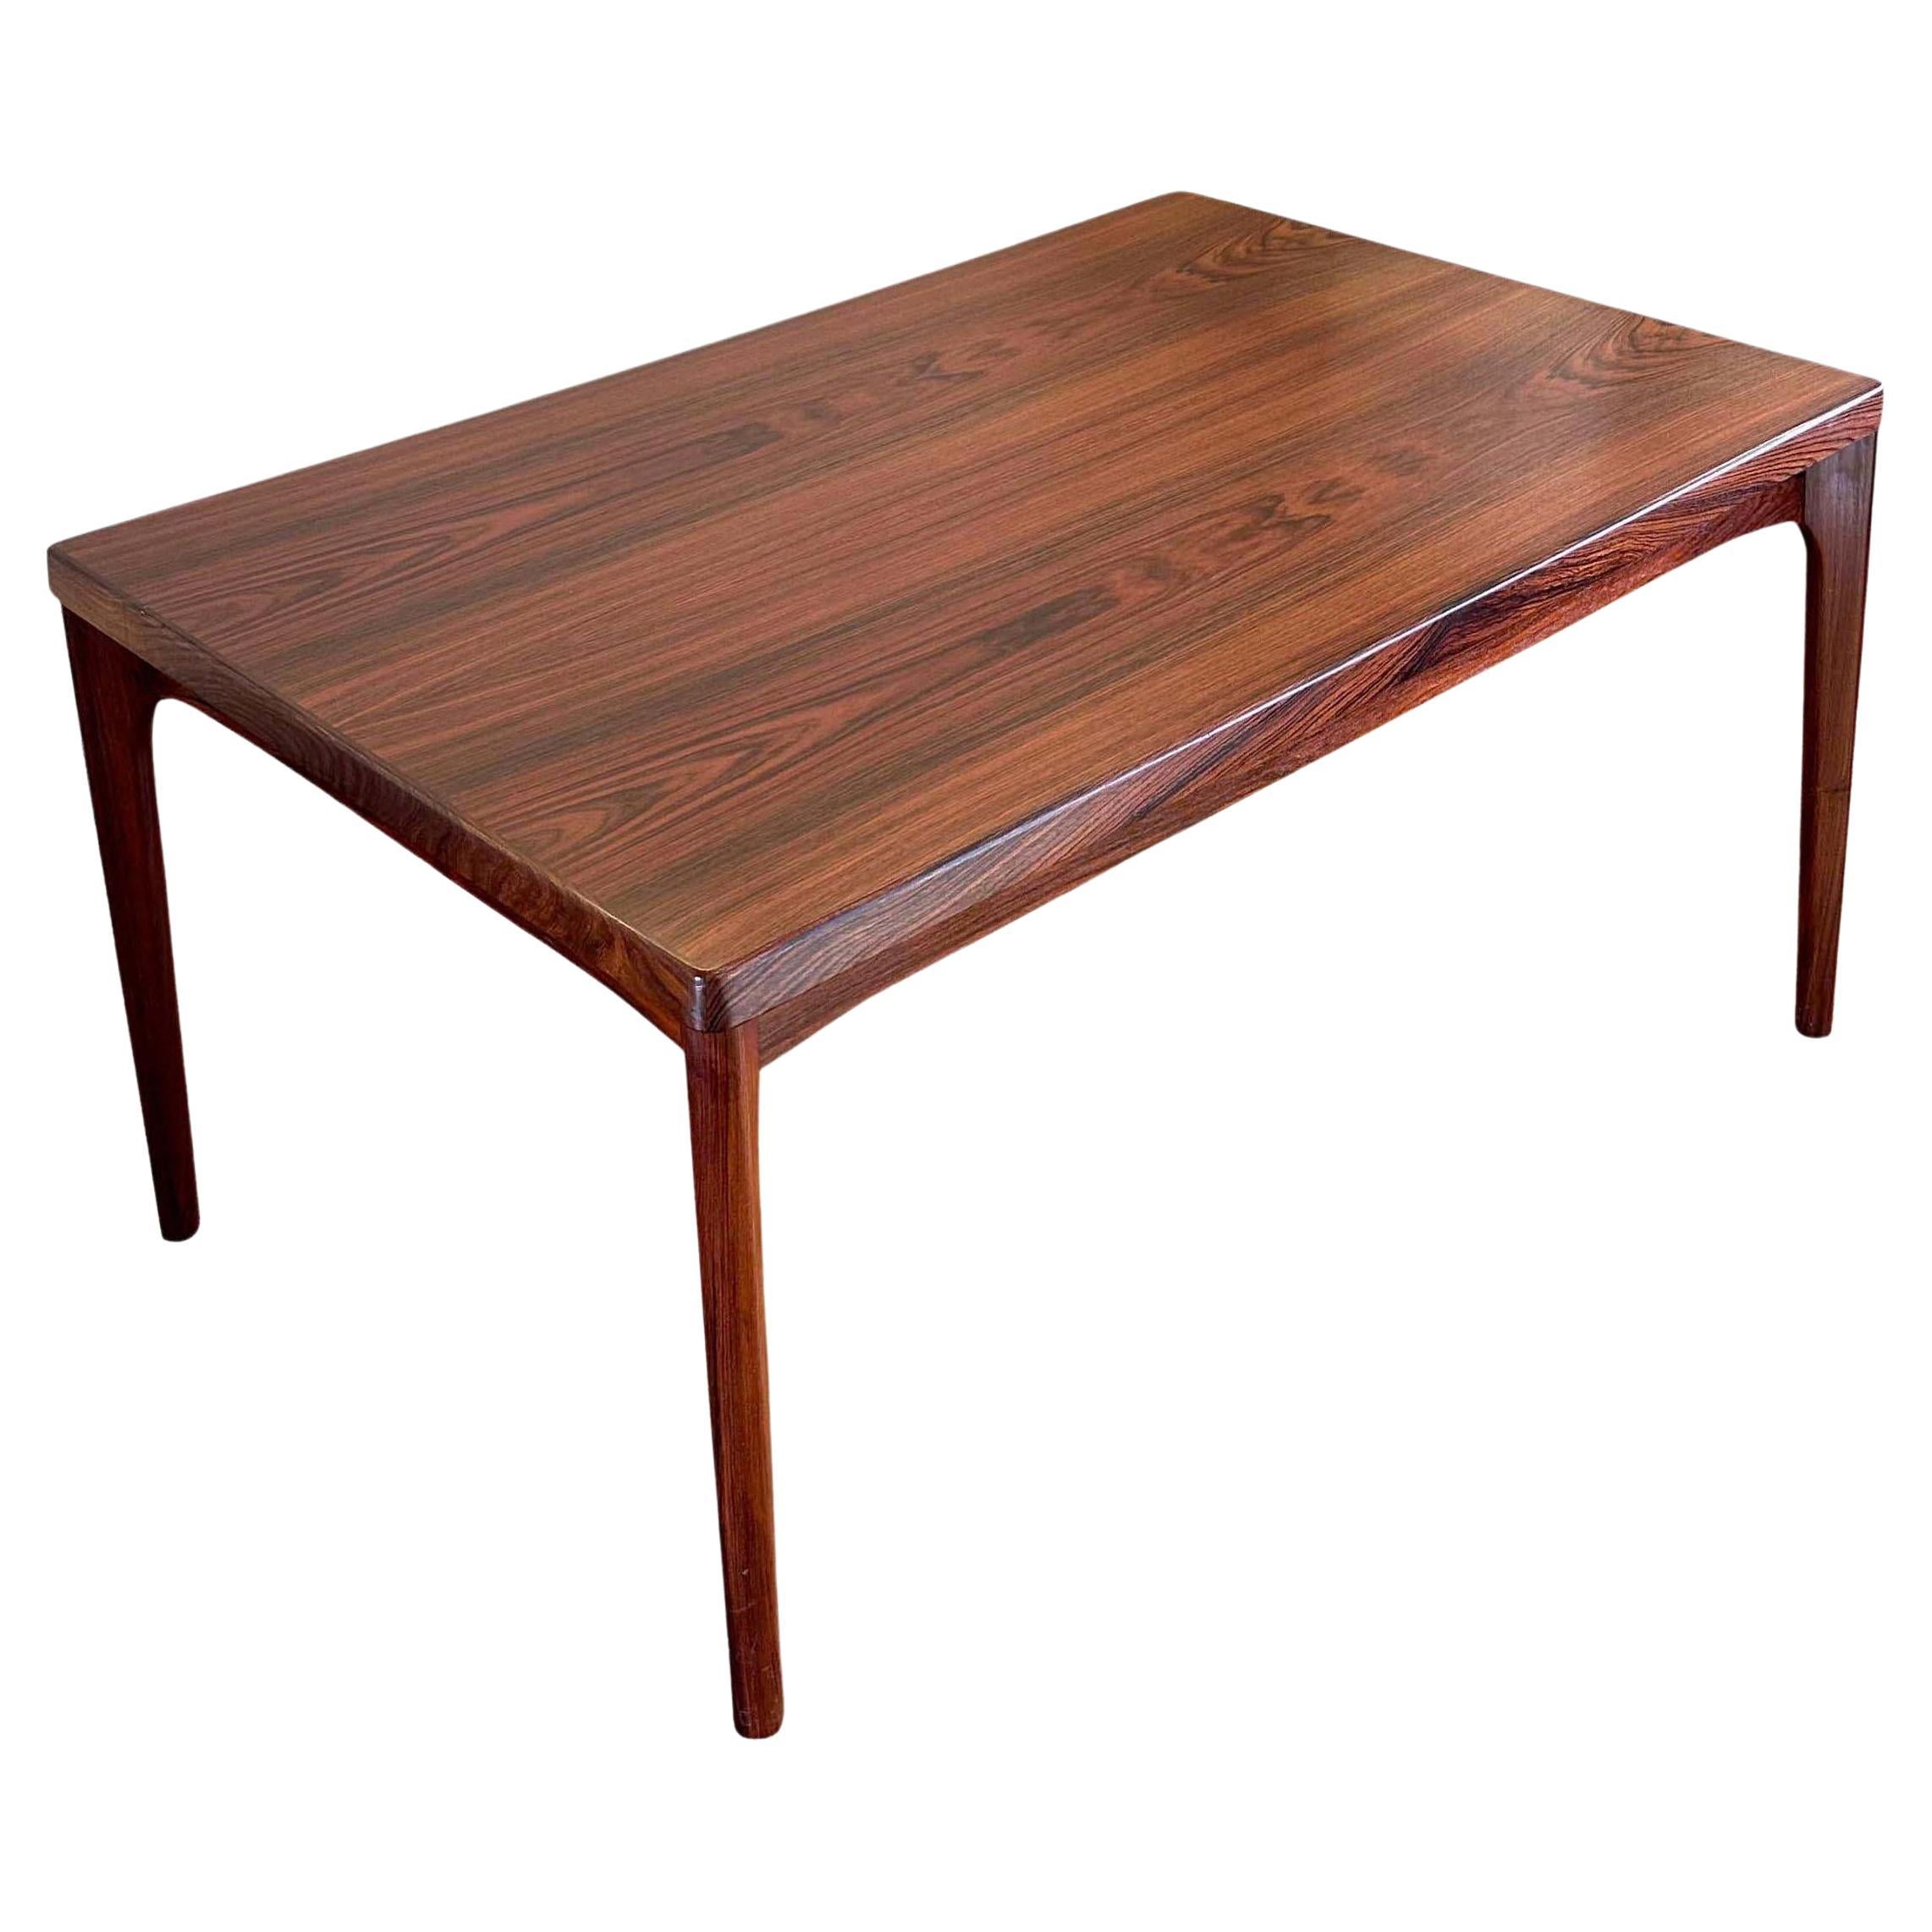 A Scandinavian Modern rosewood dining table with ingeniously hidden extending leaves designed by Henning Kjaernulf for Vejle Stole & Mobelfabrik. Denmark, 1960s. In excellent vintage condition, this is truly the most beautiful edition of this table